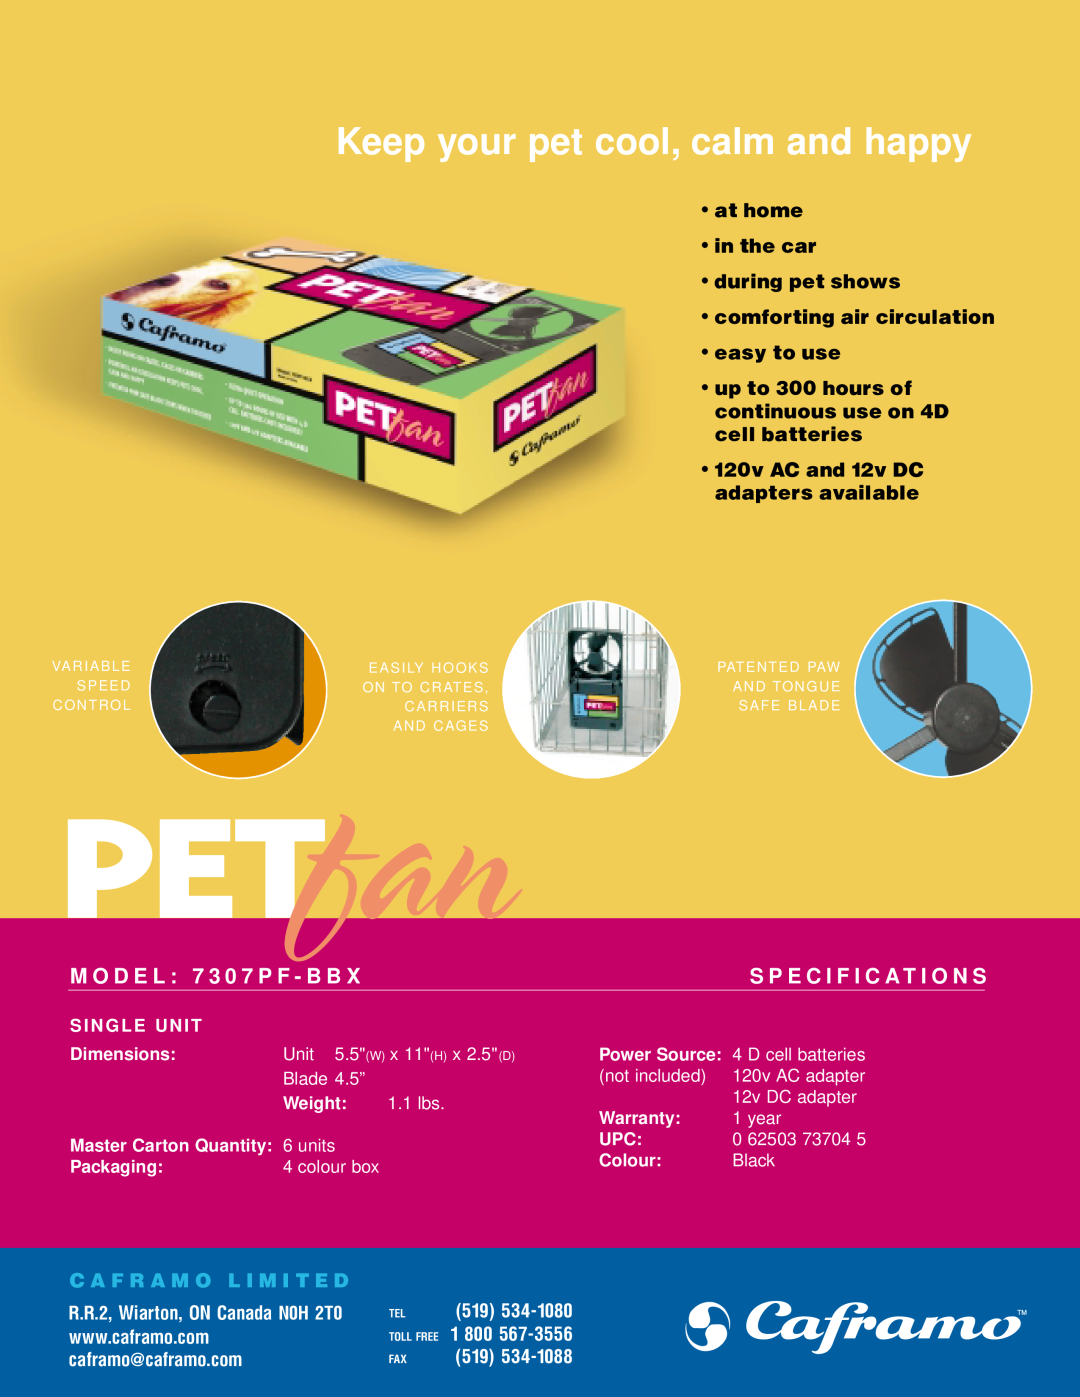 Caframo 0 62503 73704 5 manual C A F R A M O L I M I T E D, PETfan, Keep your pet cool, calm and happy 